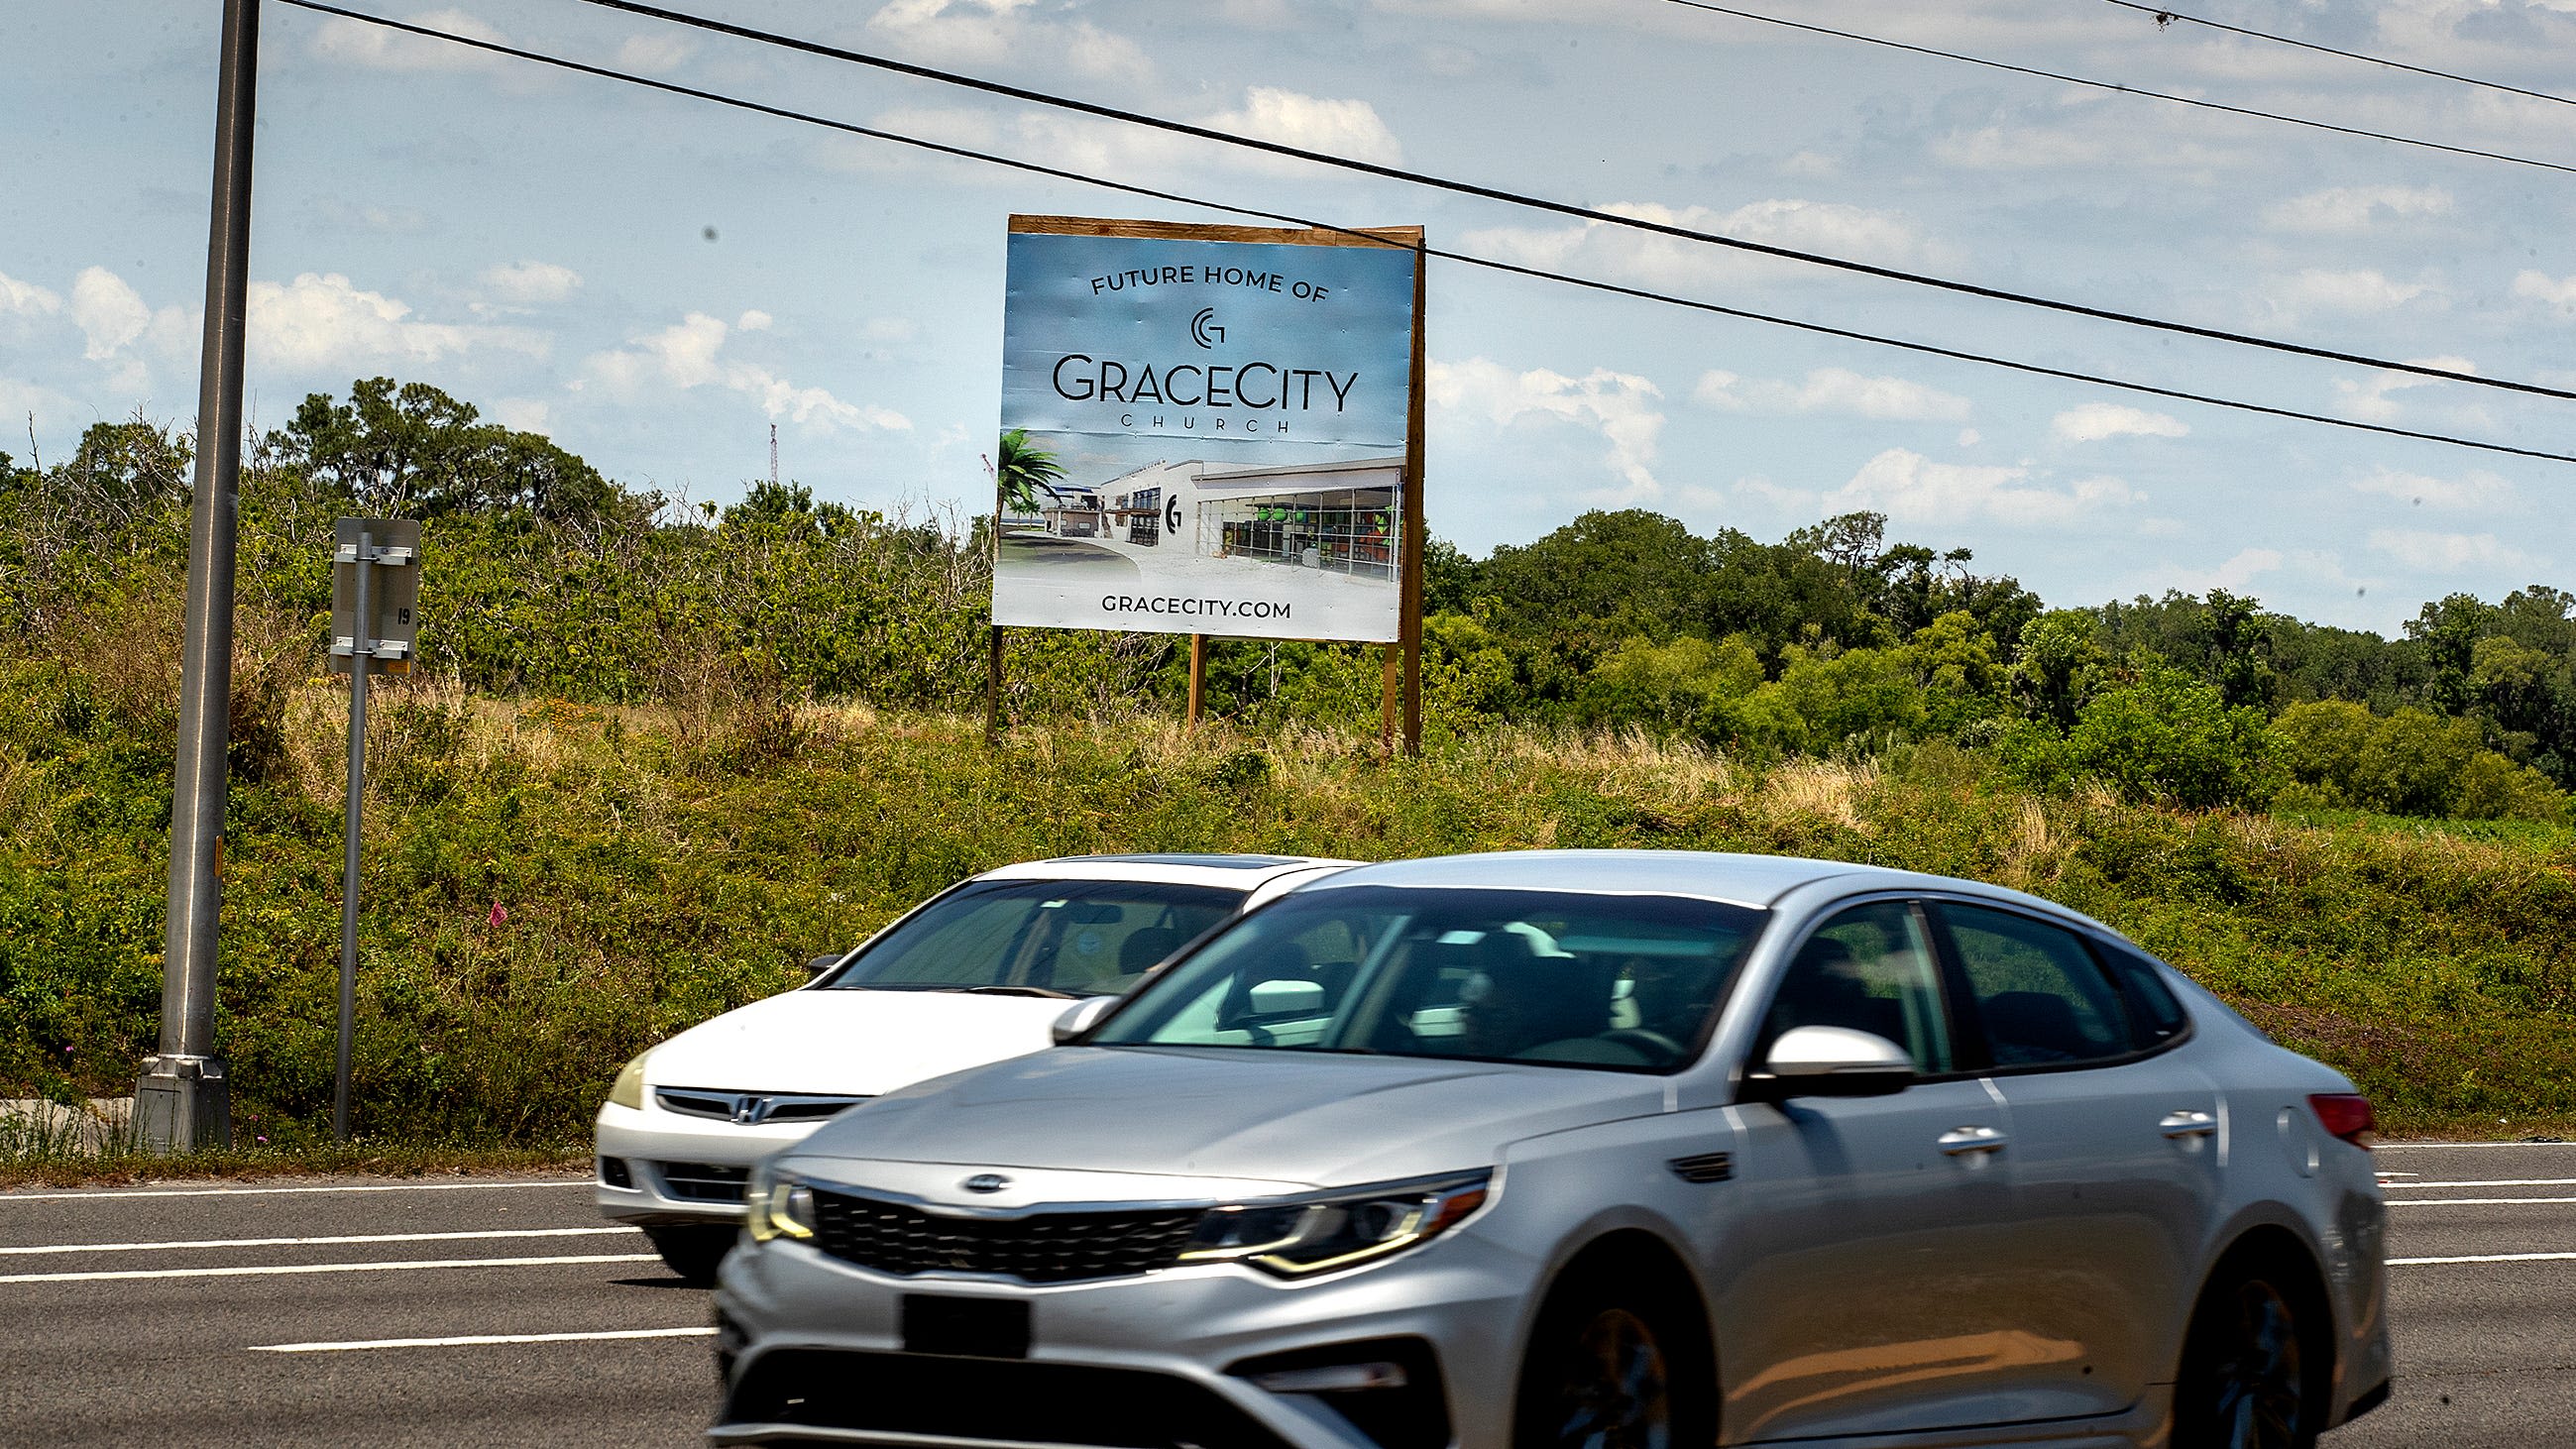 'We're here to stay': Lakeland's Grace City Church will build new campus on 50-acre site